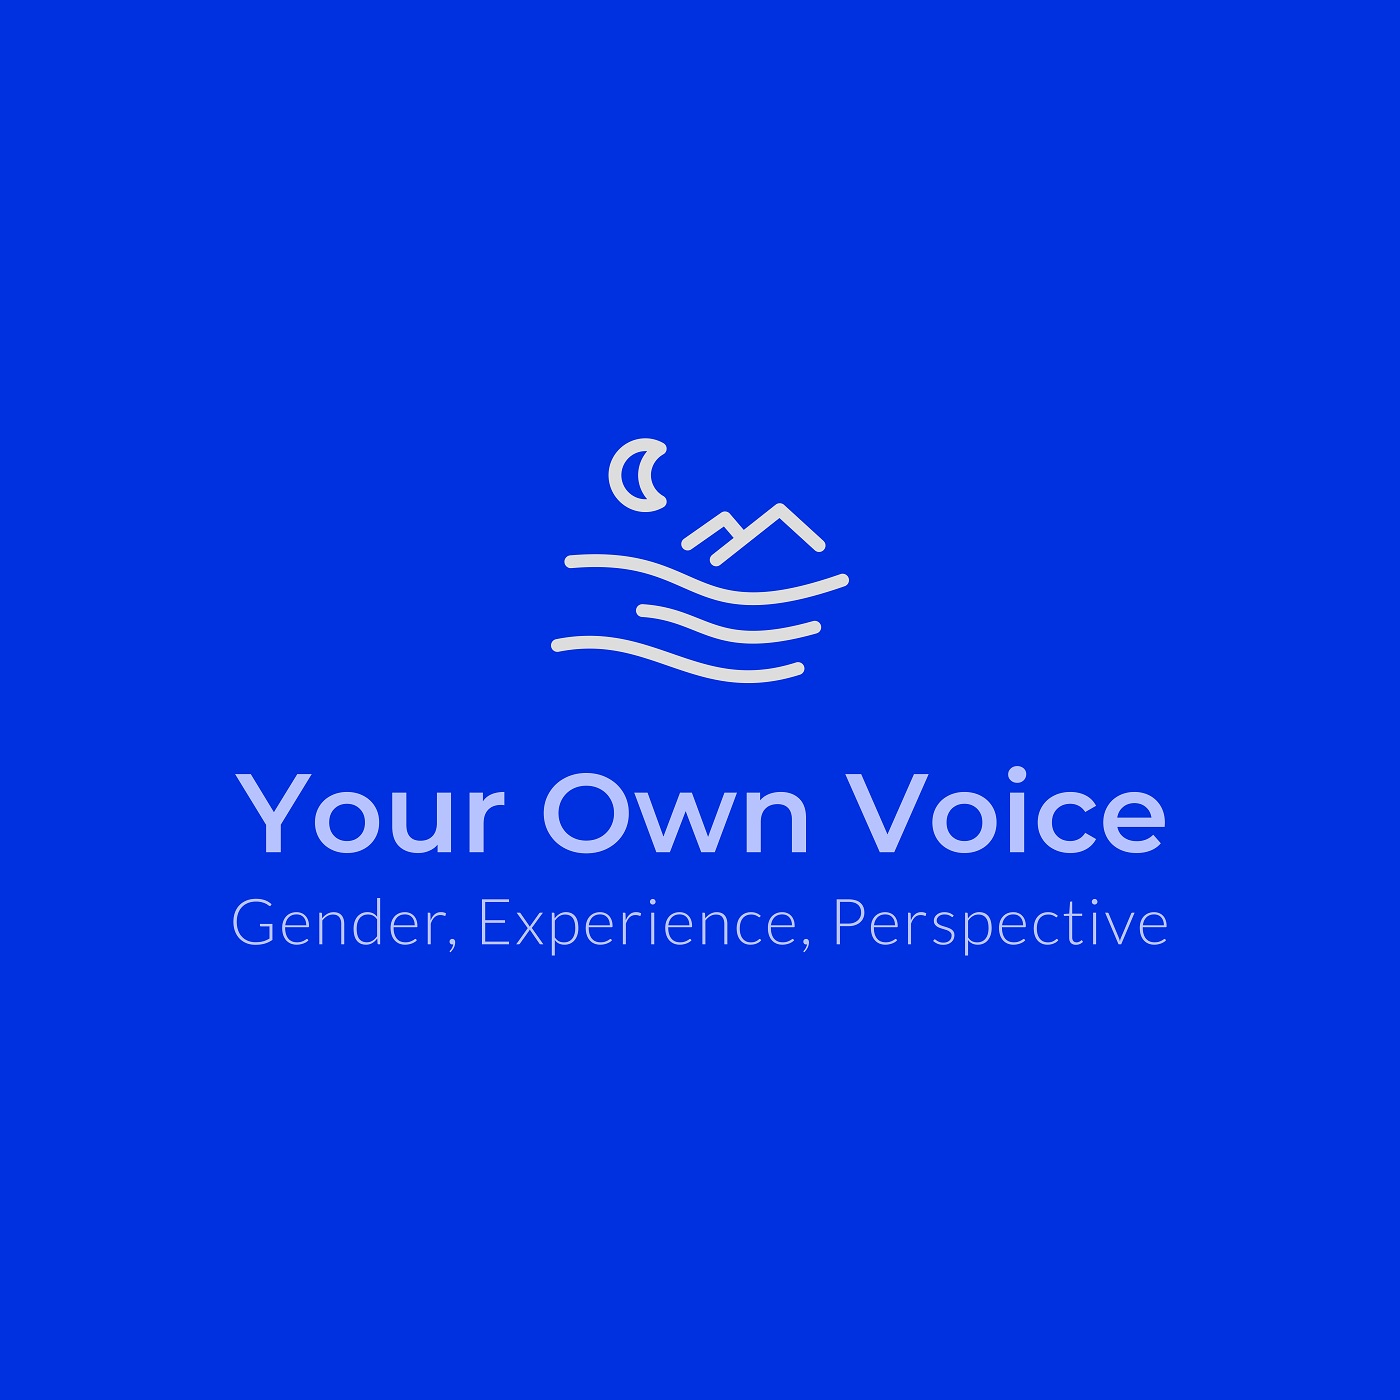 Your Own Voice: Gender, Experience & Perspective